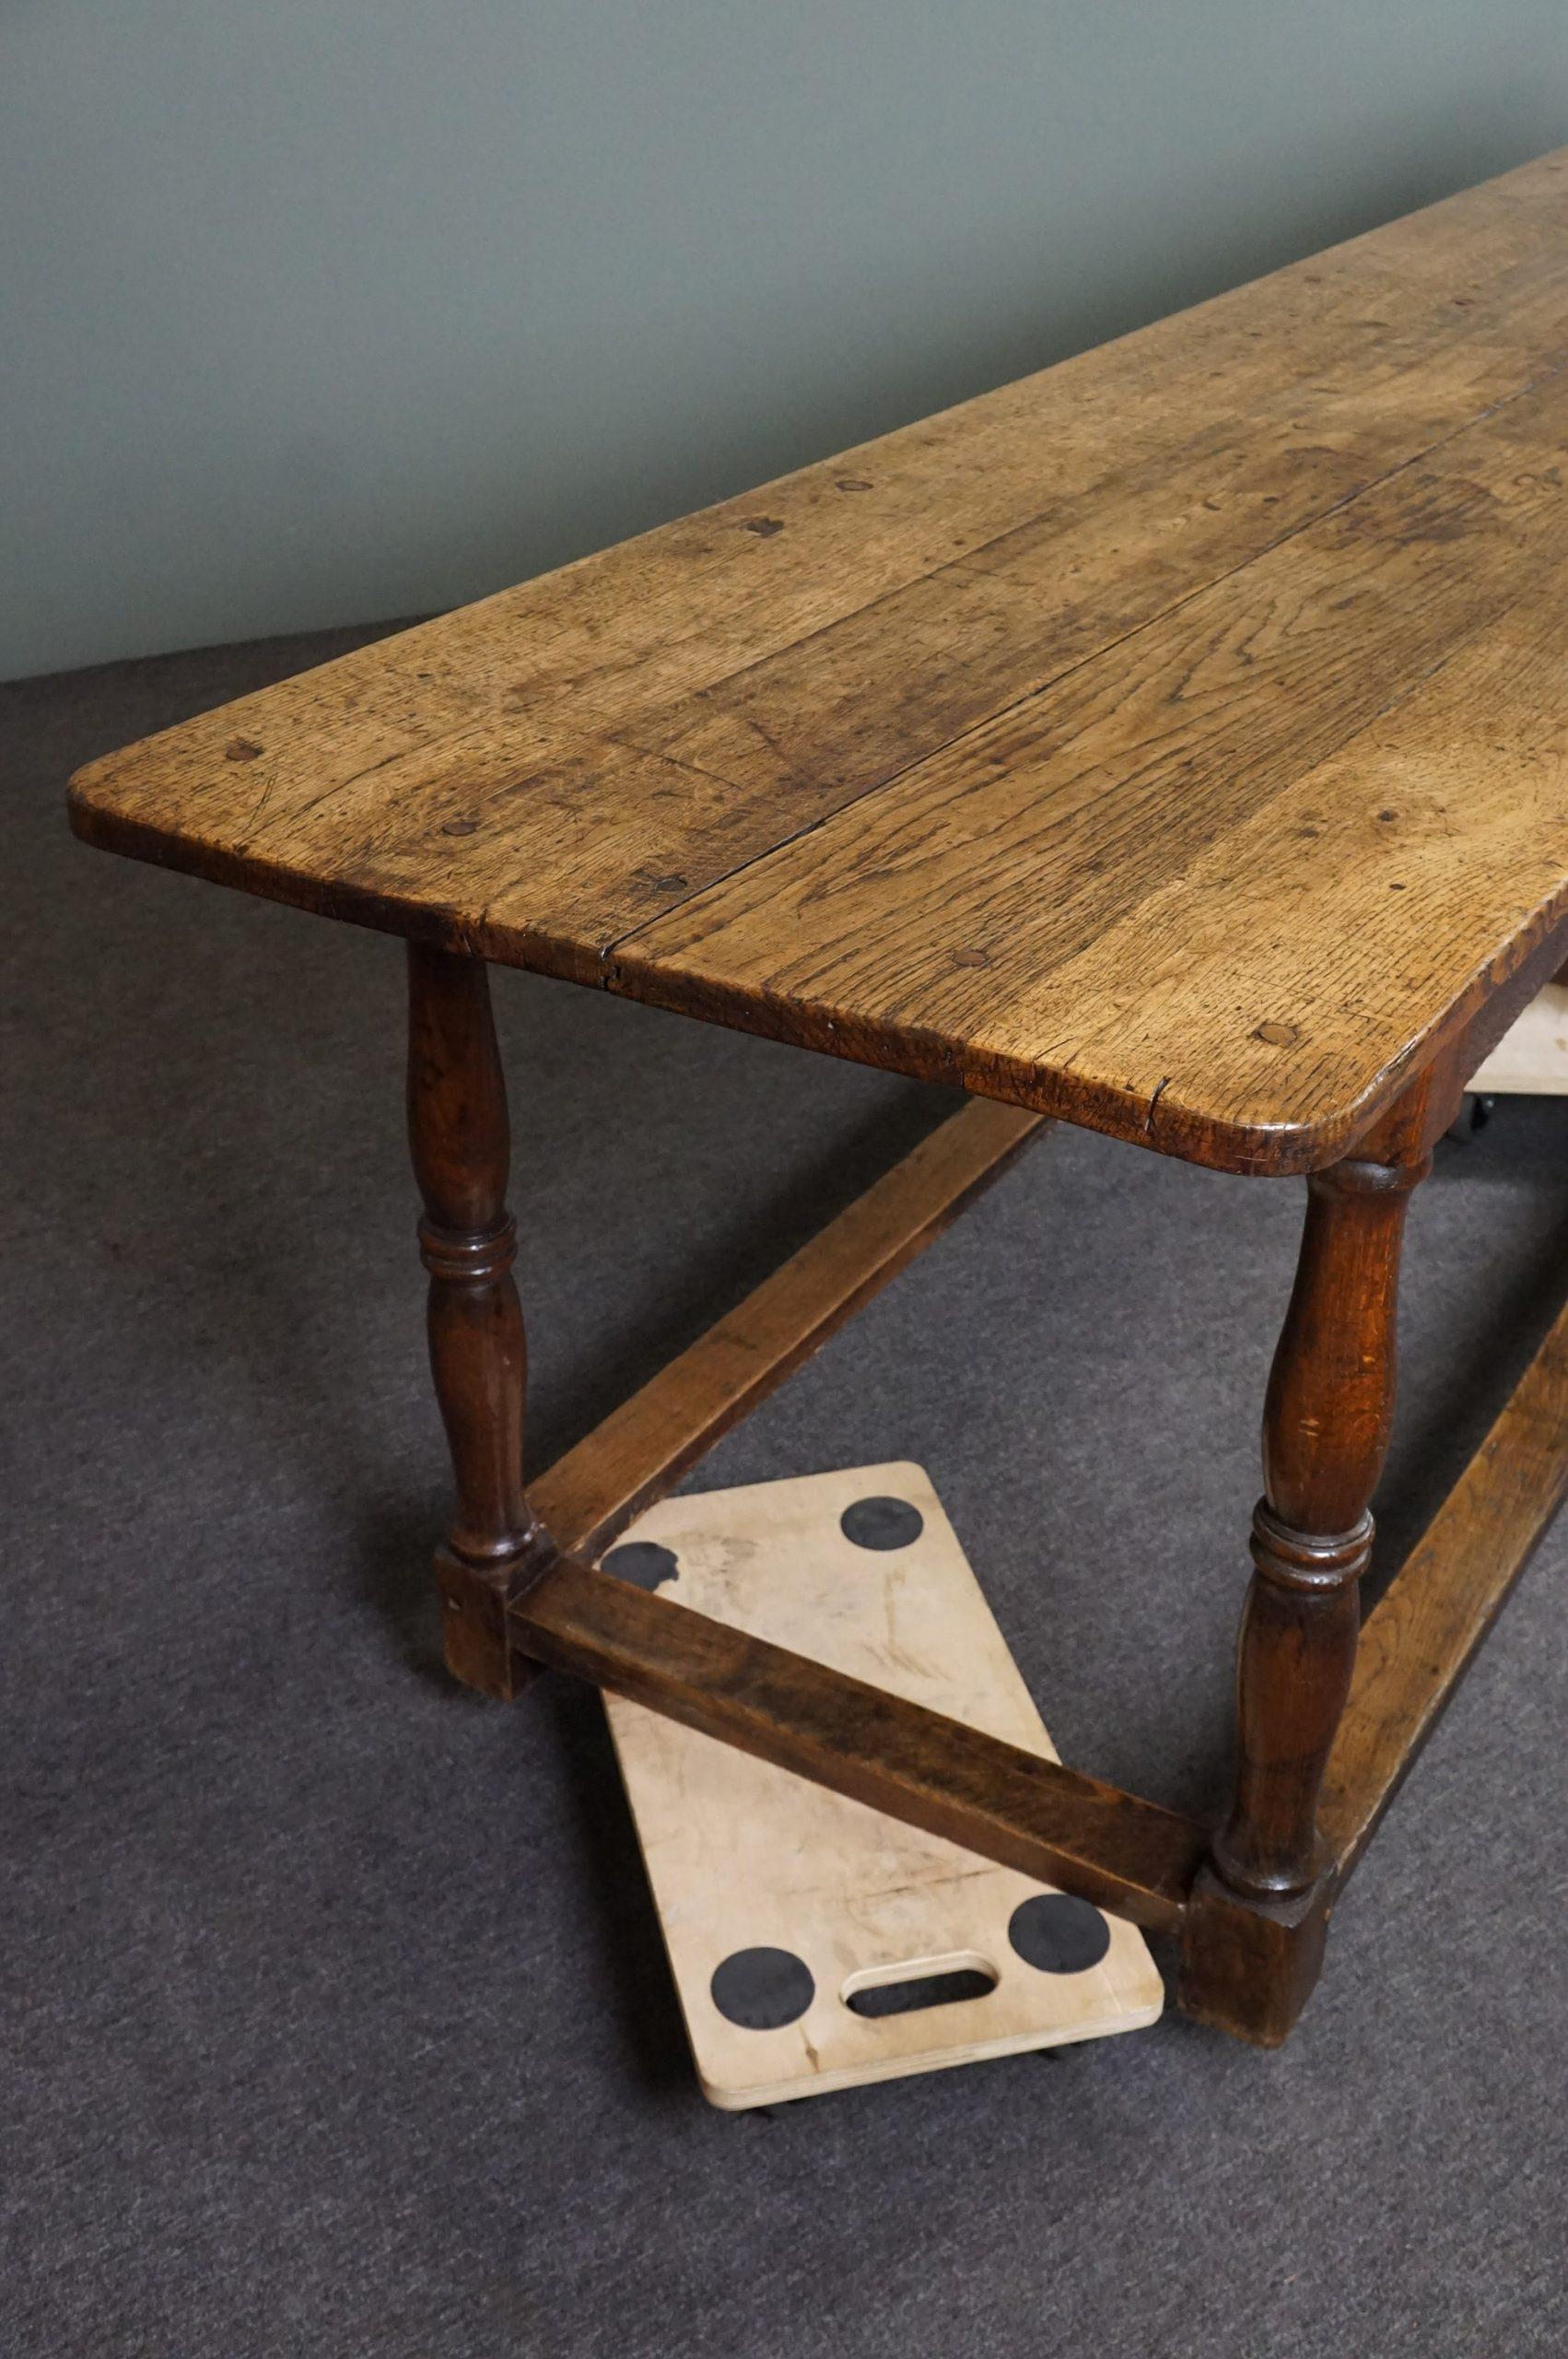 Very long antique 19th century English oak diningtable, 5 meter, Refectory table For Sale 2